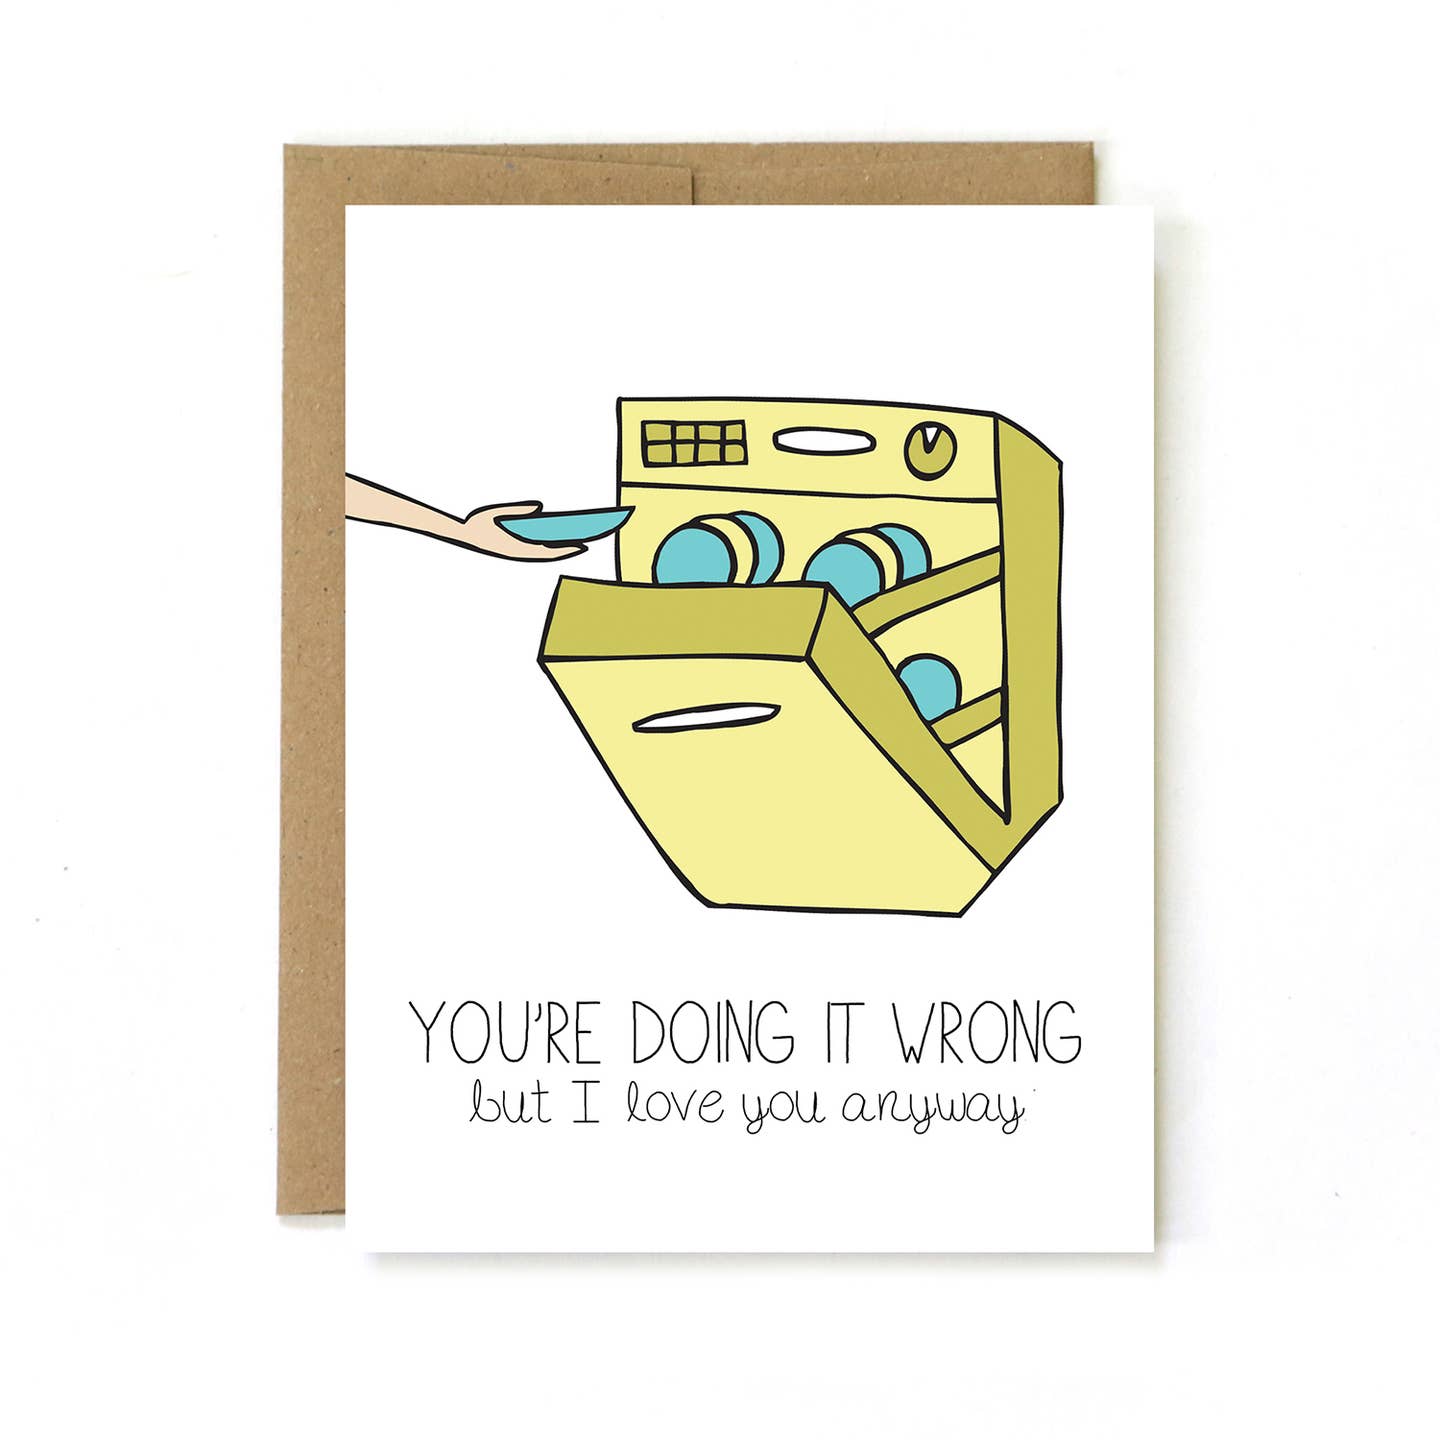 You're Doing It Wrong - Greeting Card - Unblushing